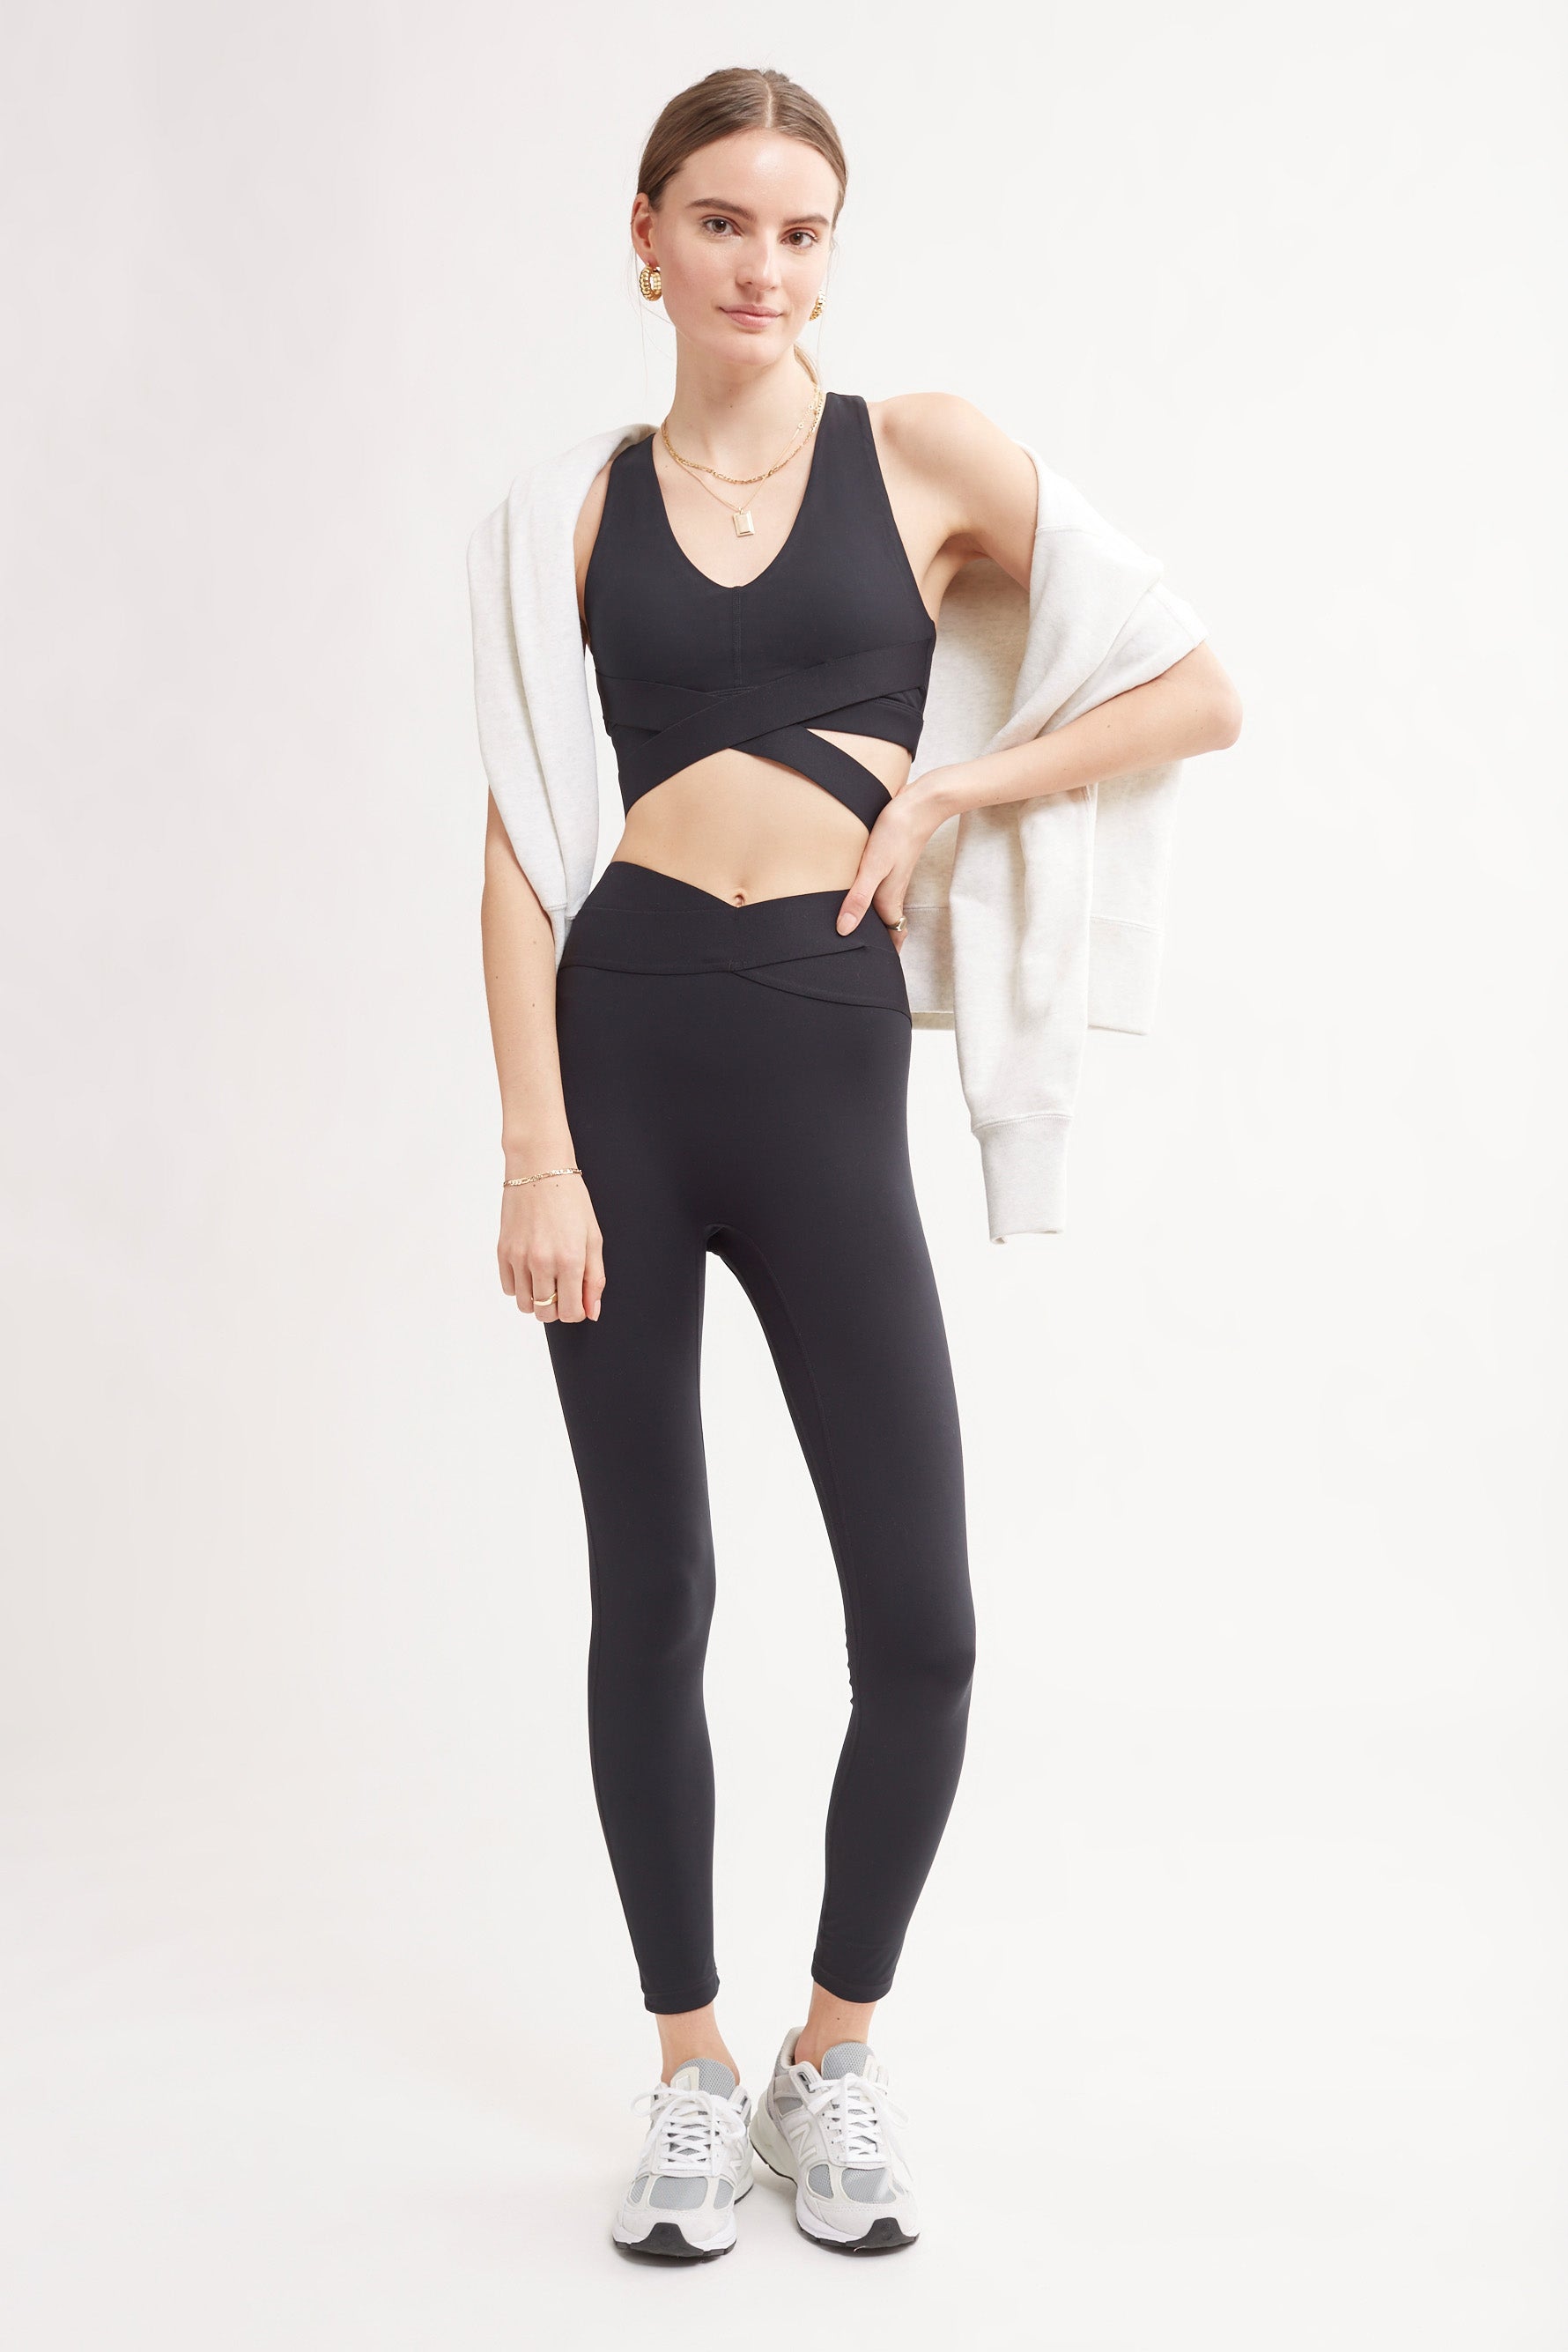 Recycled Poly Criss Cross Waistband Legging by Body Wrappers